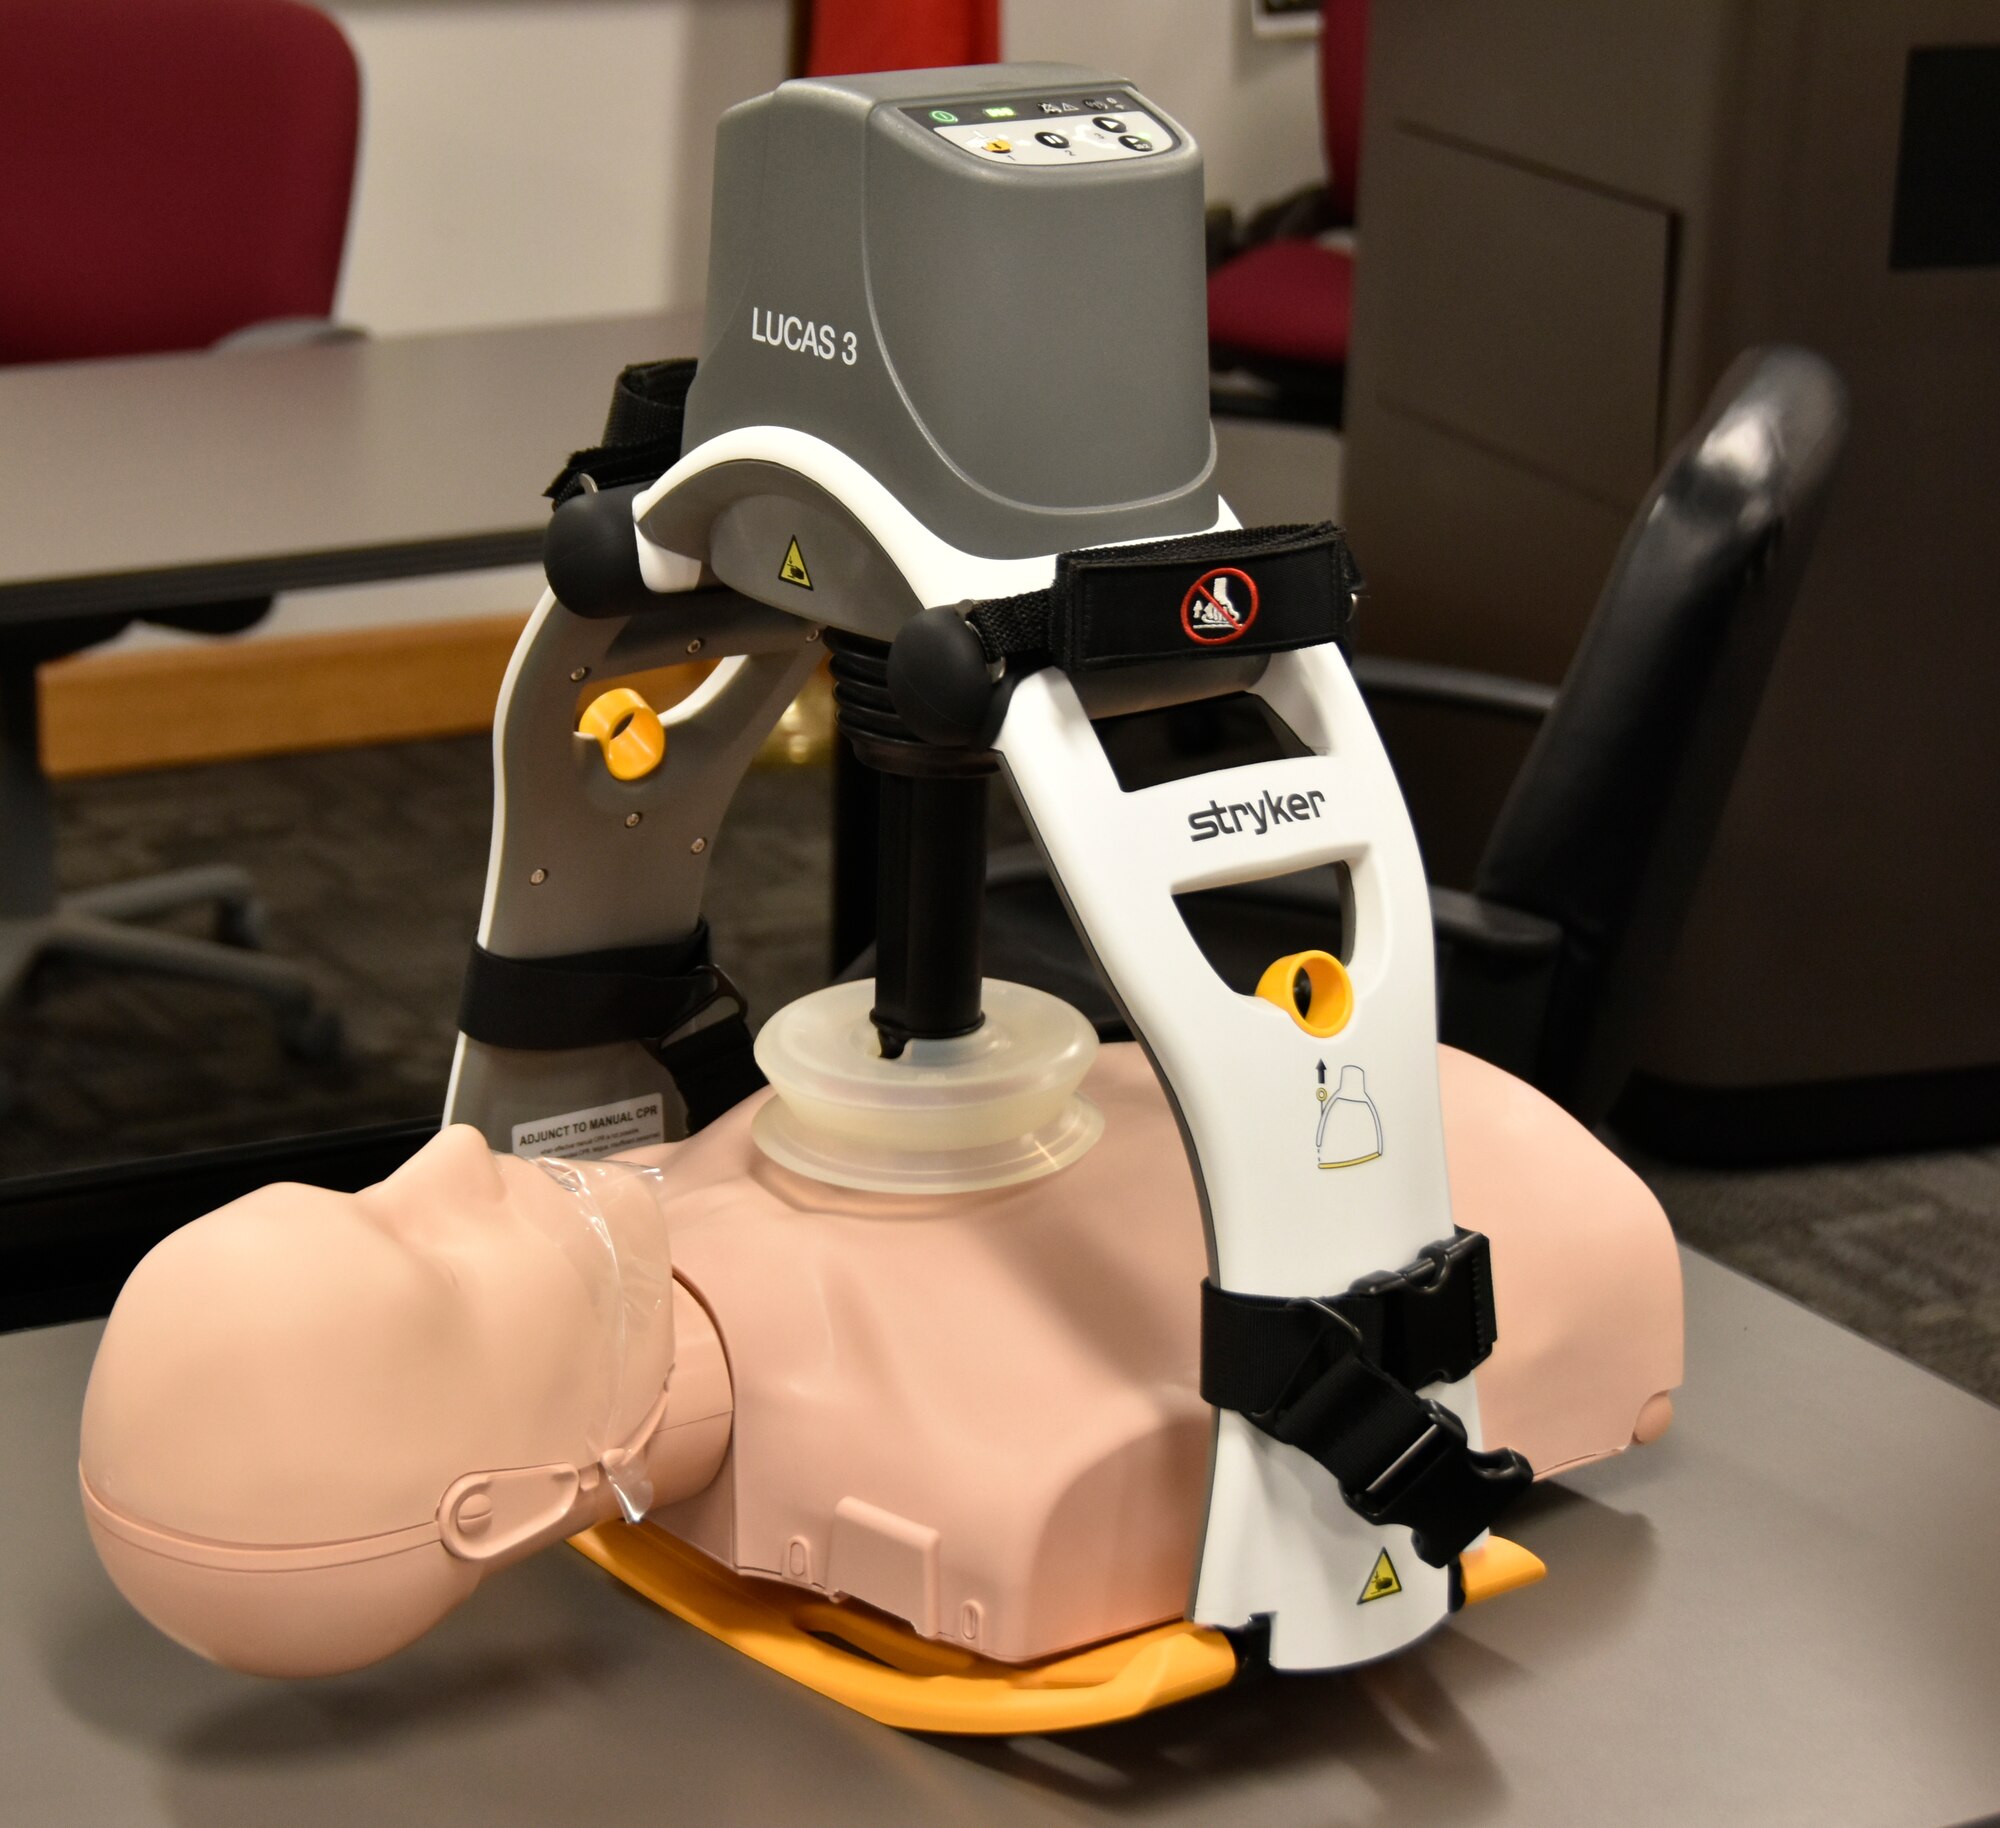 A LUCAS 3 Chest Compression System is pictured in the Arnold Fire and Emergency Services Training Room at Arnold AFB, Tenn., July 17, 2023. Arnold FES was able to acquire two of the automated CPR devices through Arnold Engineering Development Complex Spark Tank funding the department received earlier this year. Arnold AFB is the headquarters of AEDC. The LUCAS 3 is designed to deliver uninterrupted chest compressions at a consistent rate and depth, whether in the field, during transport and throughout arrival to the hospital. (U.S. Air Force photo by Bradley Hicks)